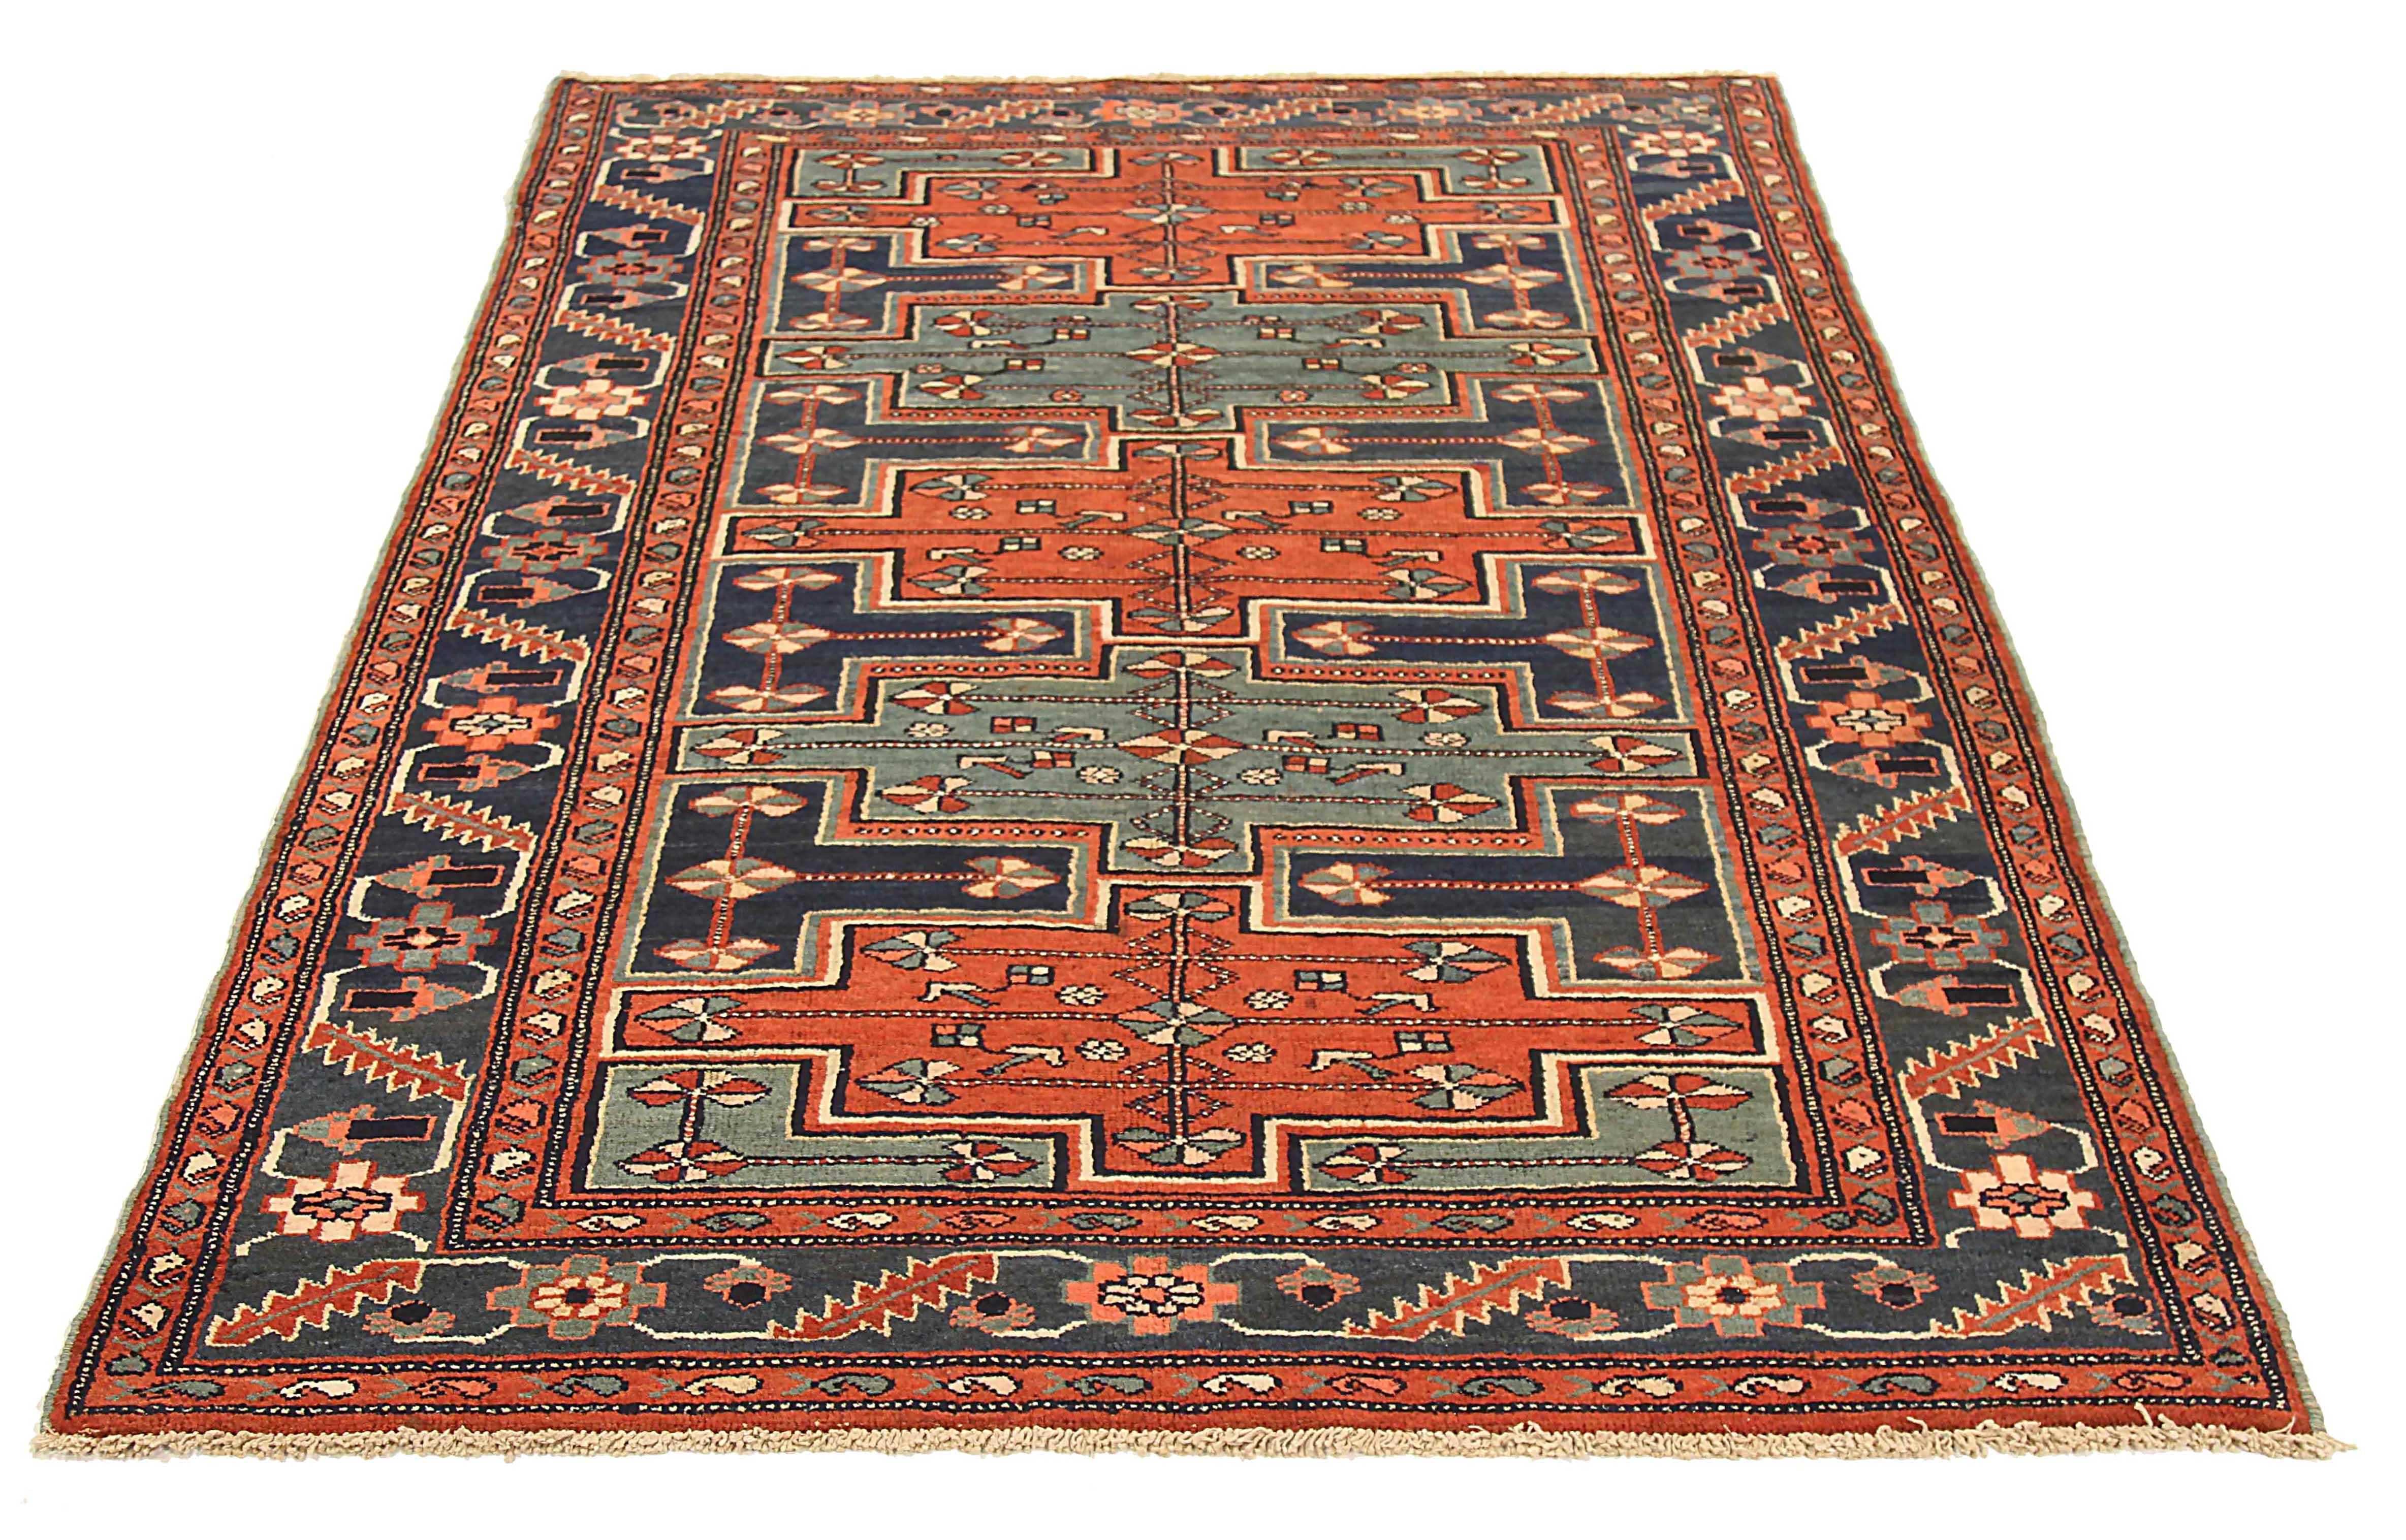 Antique Persian area rug handwoven from the finest sheep’s wool. It’s colored with all-natural vegetable dyes that are safe for humans and pets. It’s a traditional Zanjan design handwoven by expert artisans. It’s a lovely area rug that can be